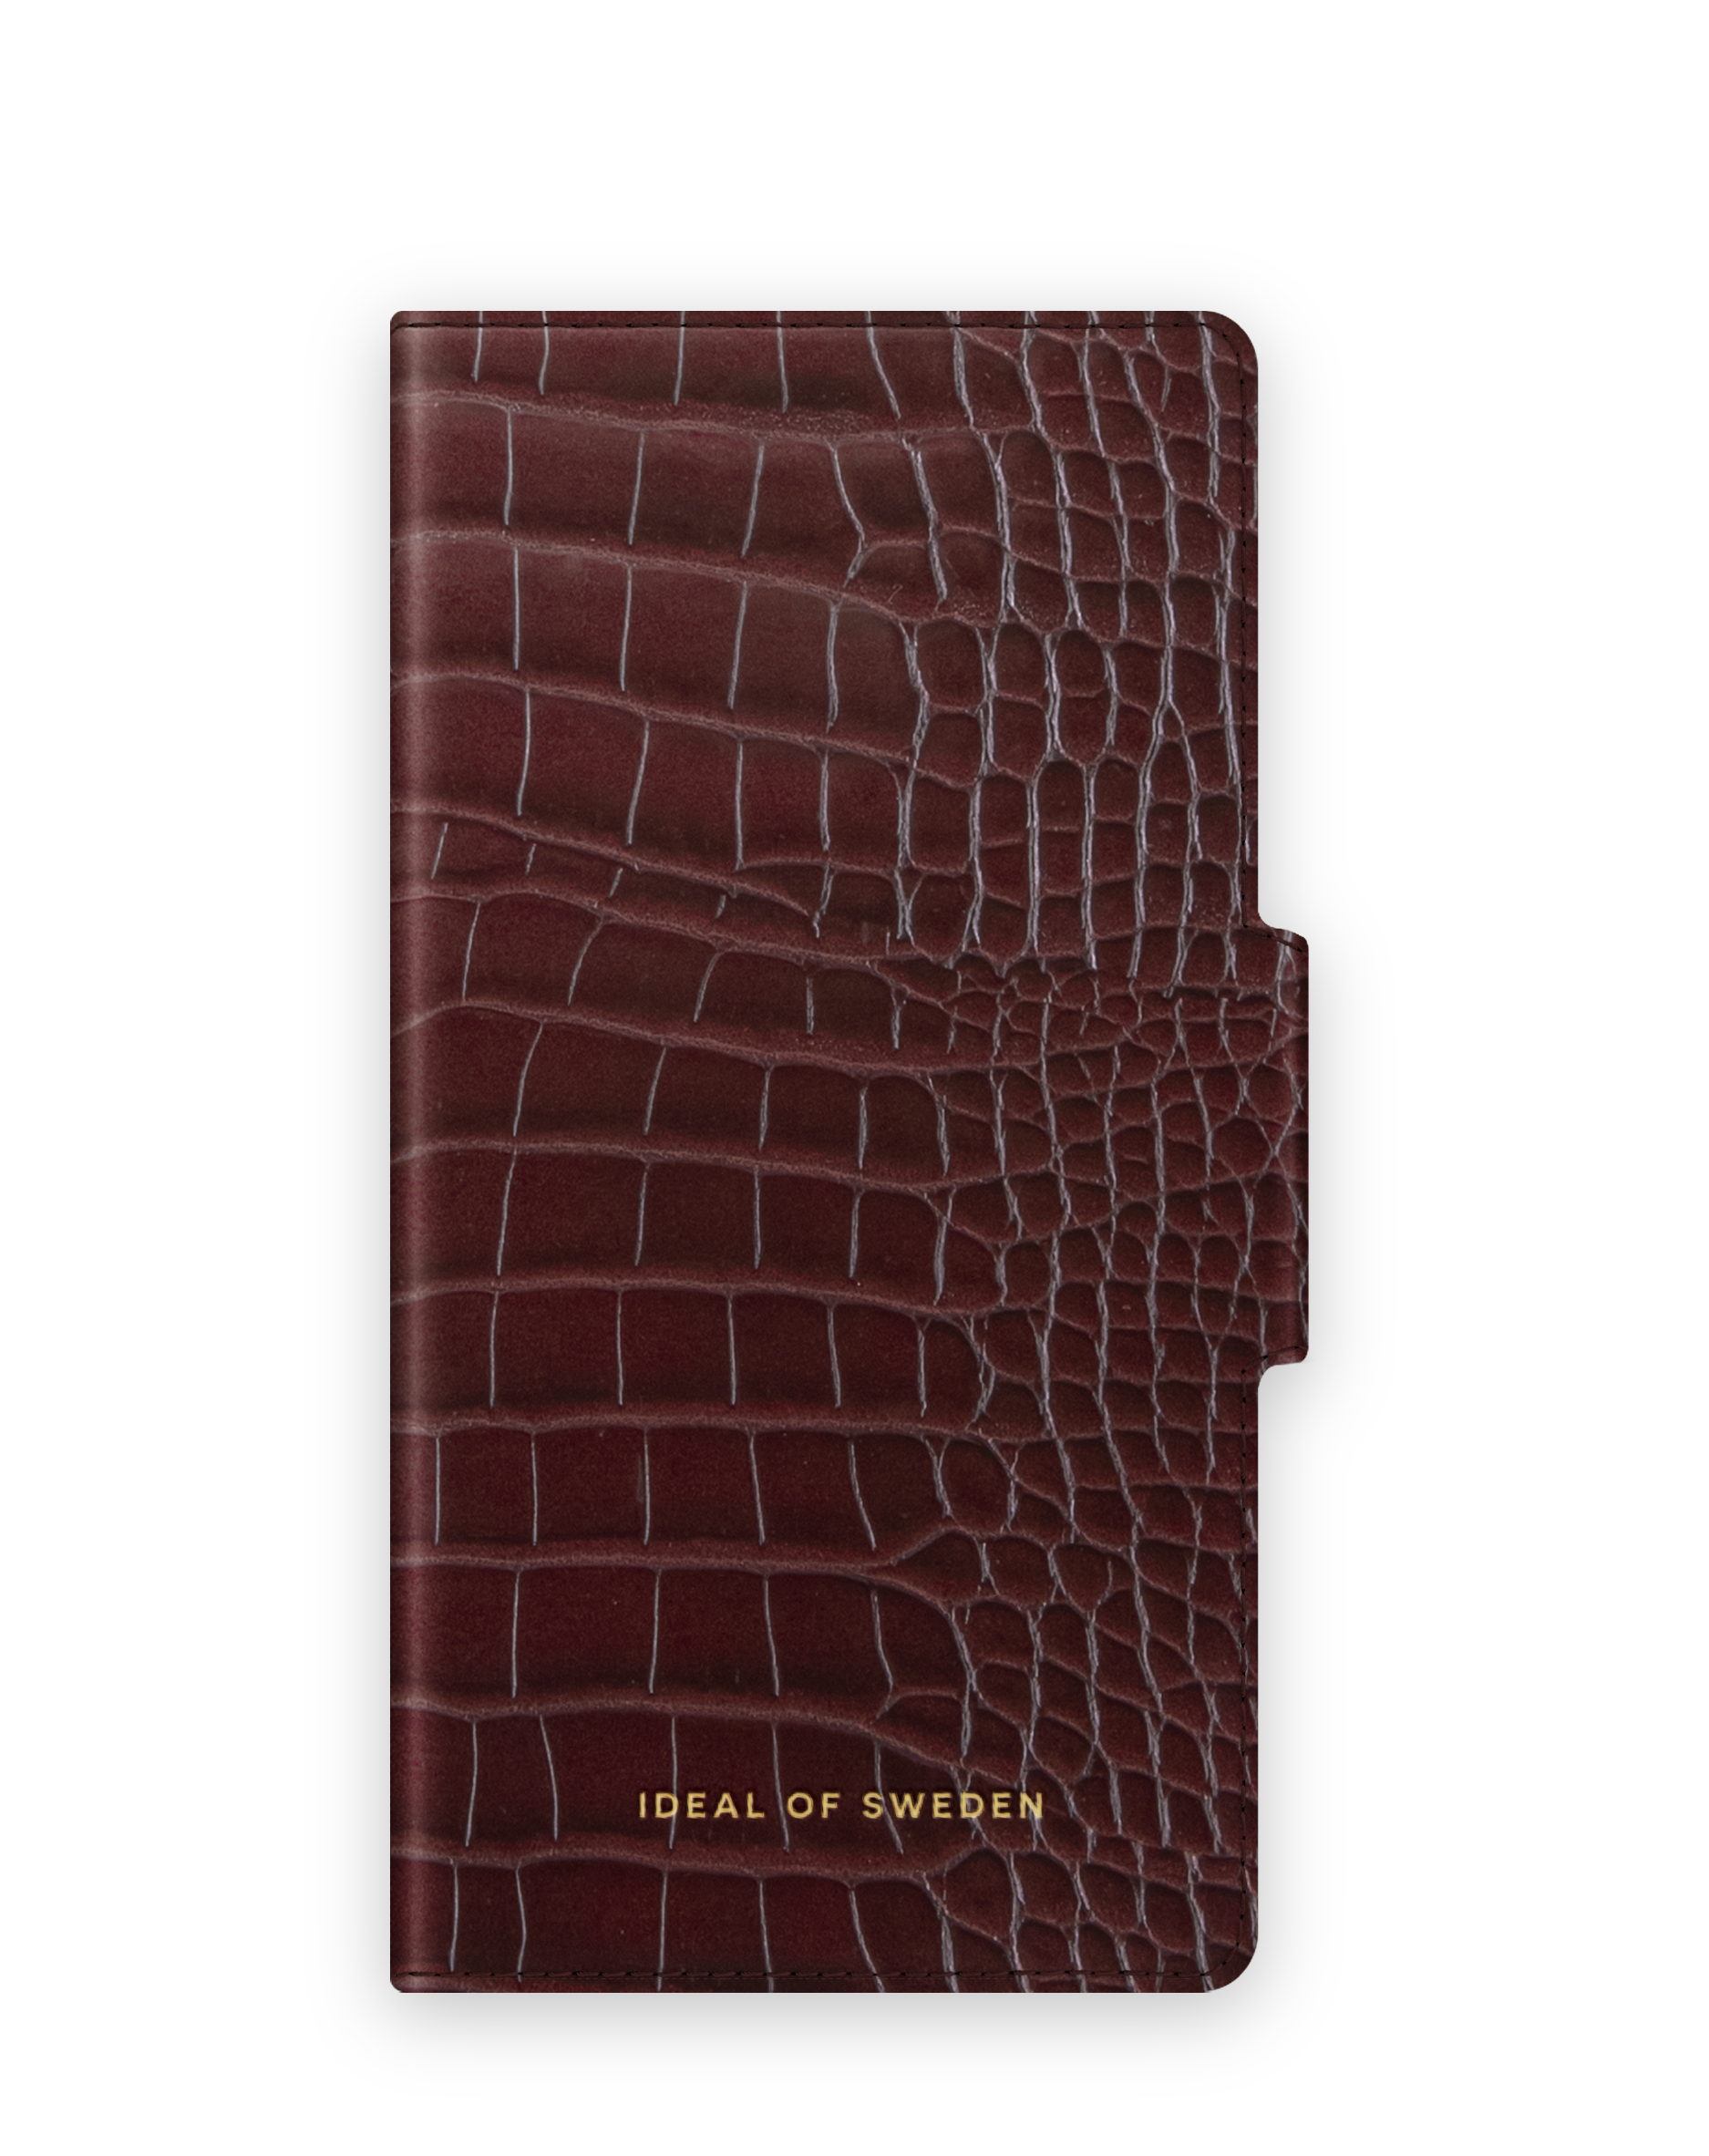 / IDEAL IDAWAW21-I1961-326, OF Bookcover, iPhone SWEDEN XR, Scarlet Apple, 11 Croco iPhone